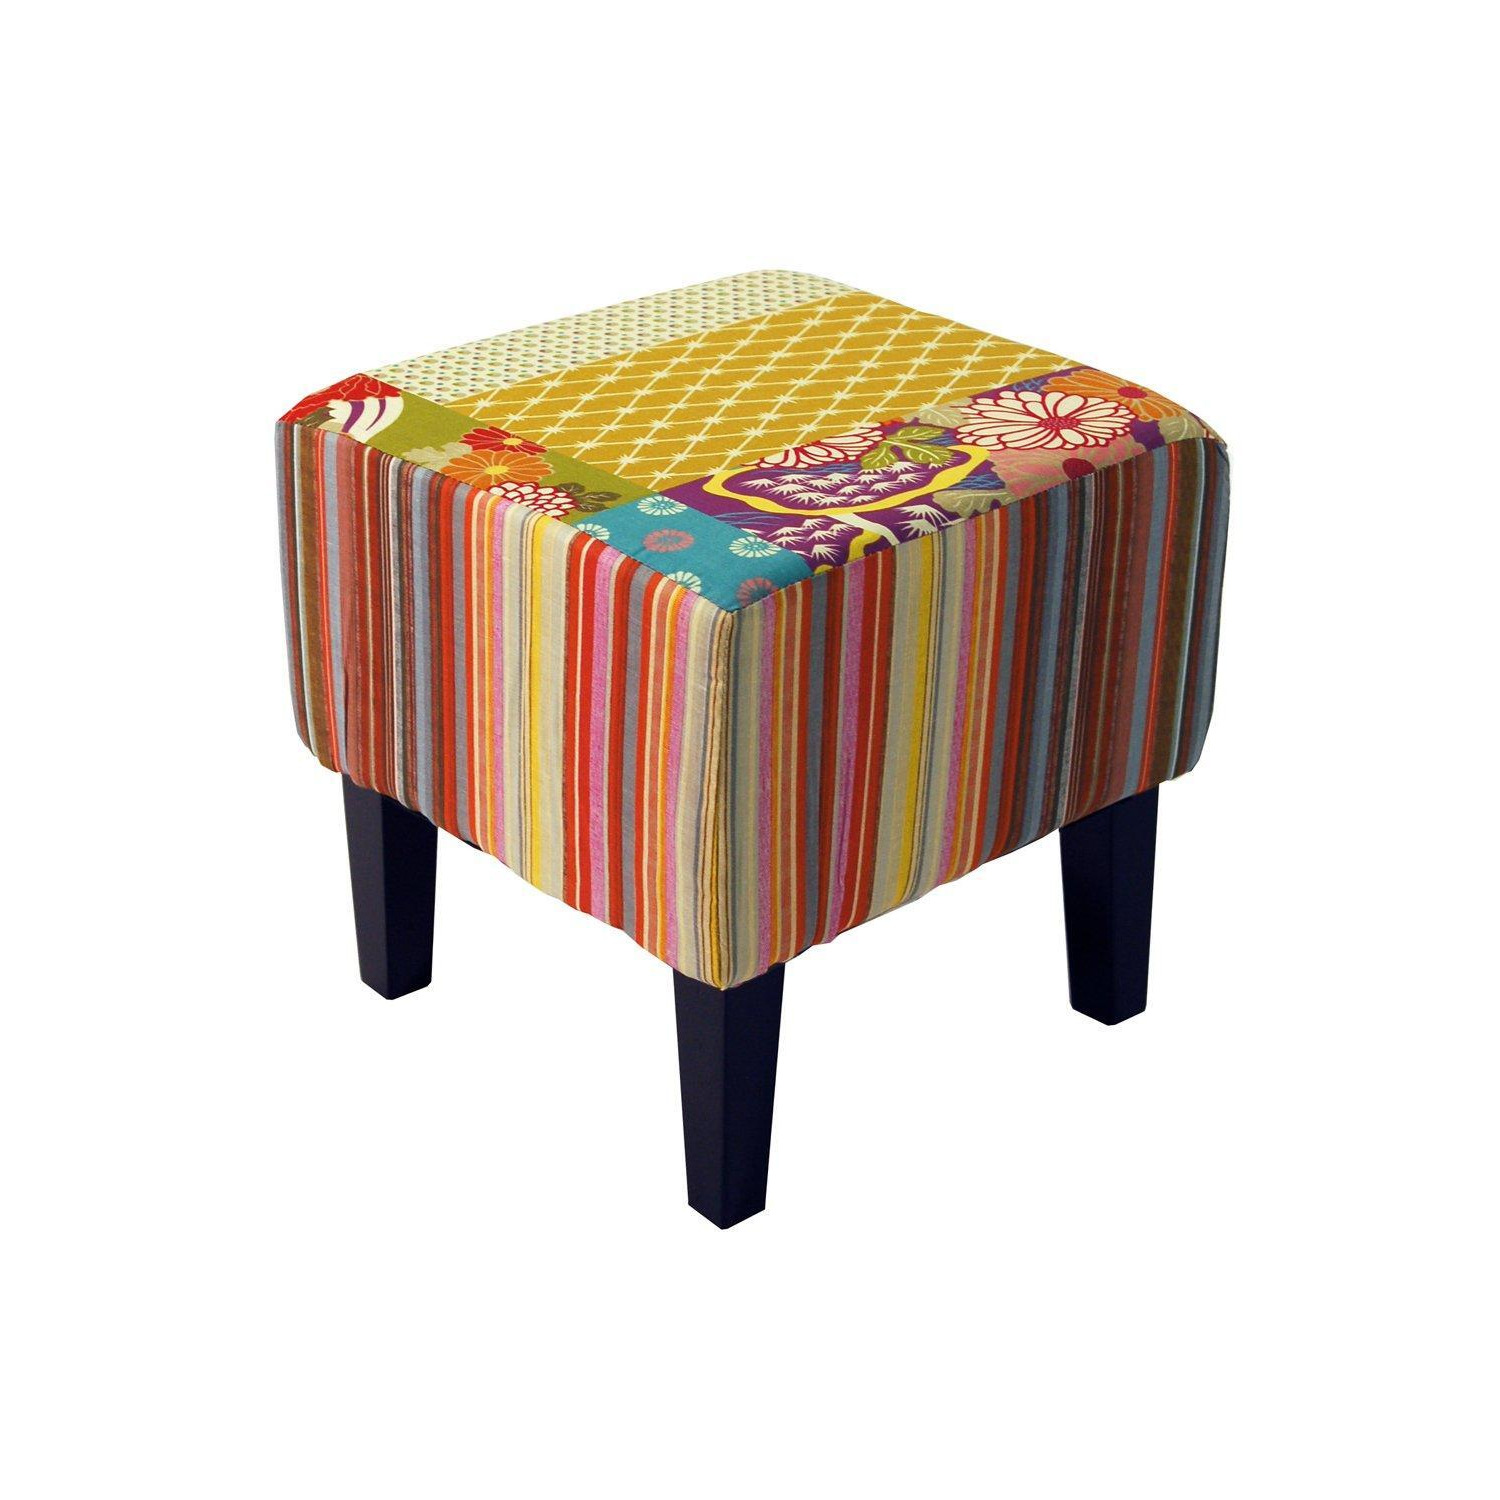 Patchwork - Shabby Chic Square Pouffe Padded Stool wood Legs - Multi-coloured - image 1